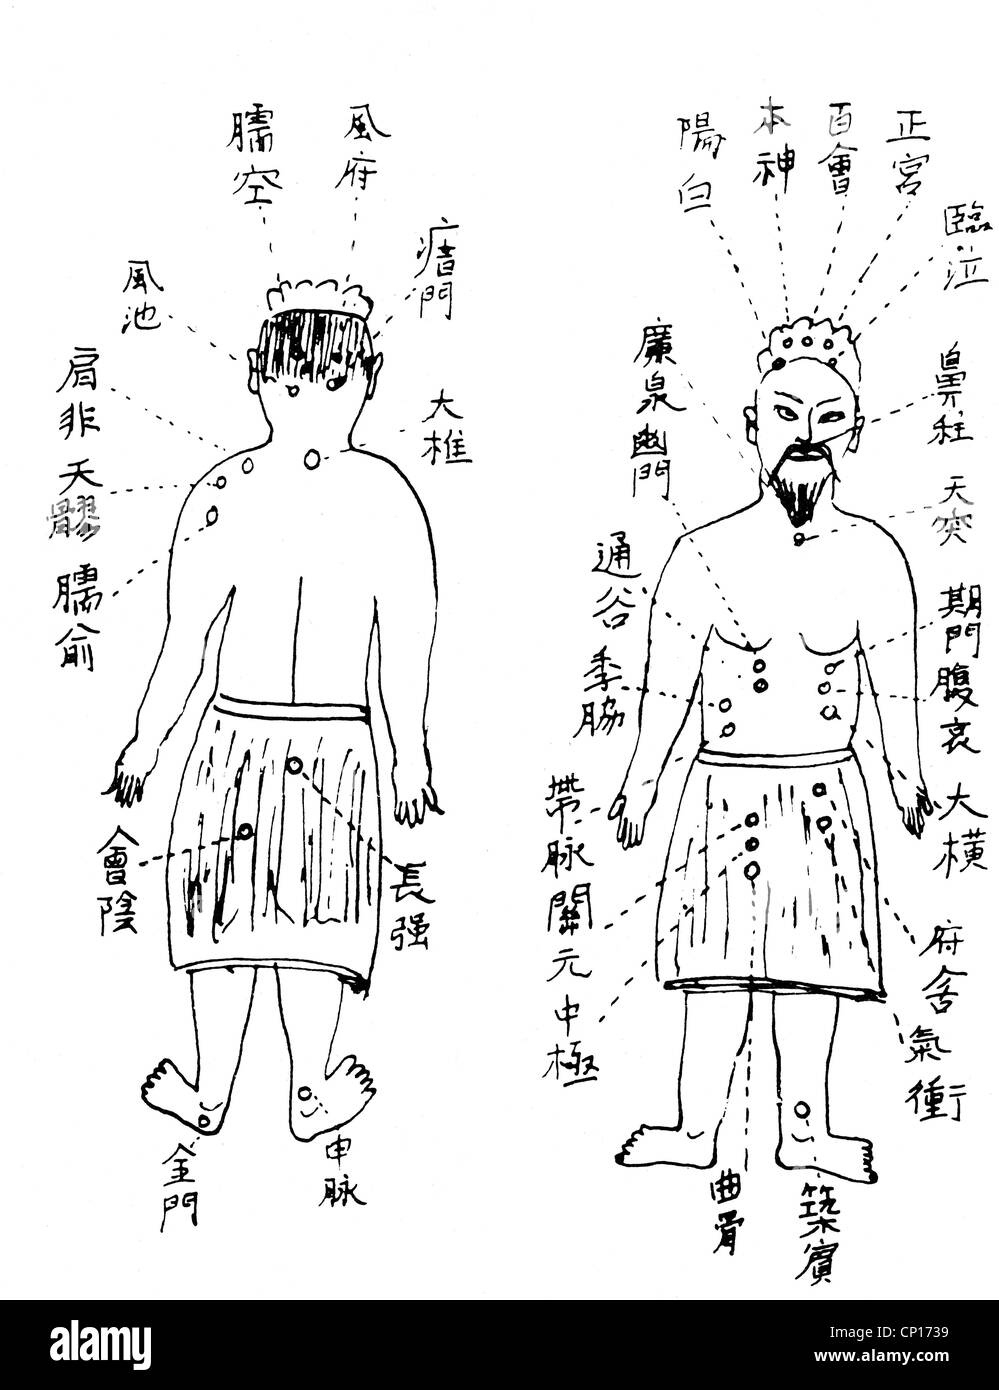 medicine, Chinese acupuncture, chart of the acupuncture displaying the different, in compliance of the illness of the body parts, illustration, man, men, masculine, in front, fore, forward, forwards, onwards, back, point, points, Chinese script, character, characters, clipping, cut out, cut-out, cut-outs, acupuncture, acupunctures, homeopathy, homoeopathy, hygienics, image, images, description, visualization, figure, figures, historic, historical, people, male, Additional-Rights-Clearences-Not Available Stock Photo